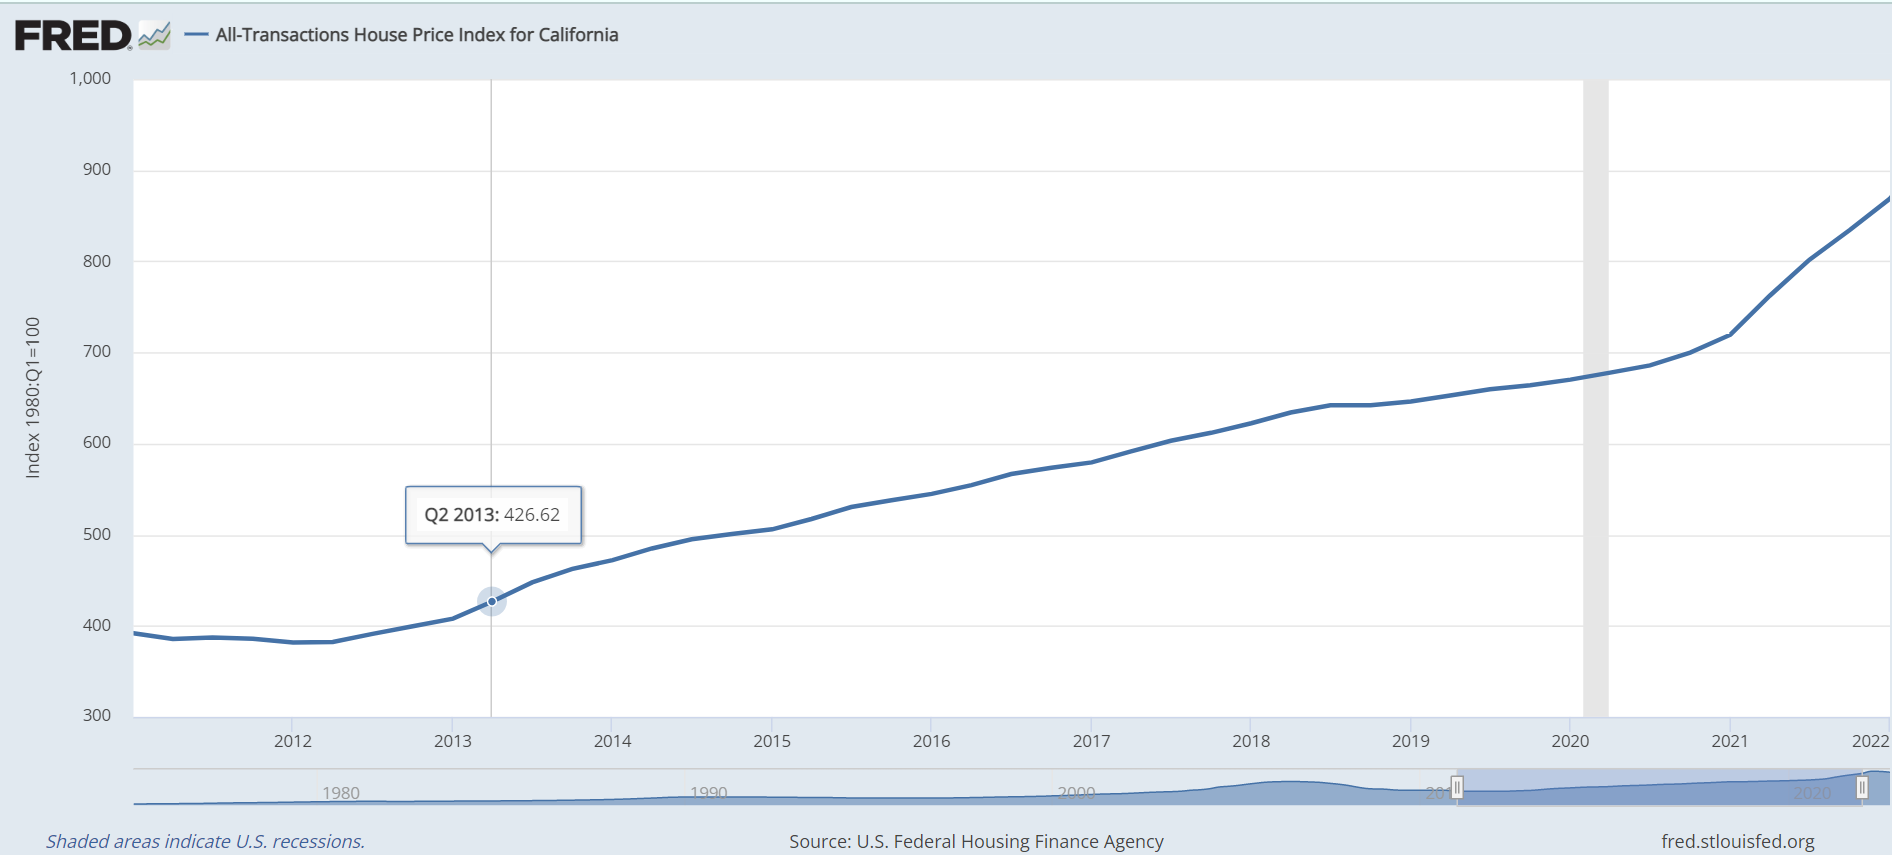 All-Transactions House Price Index for California over the last decade